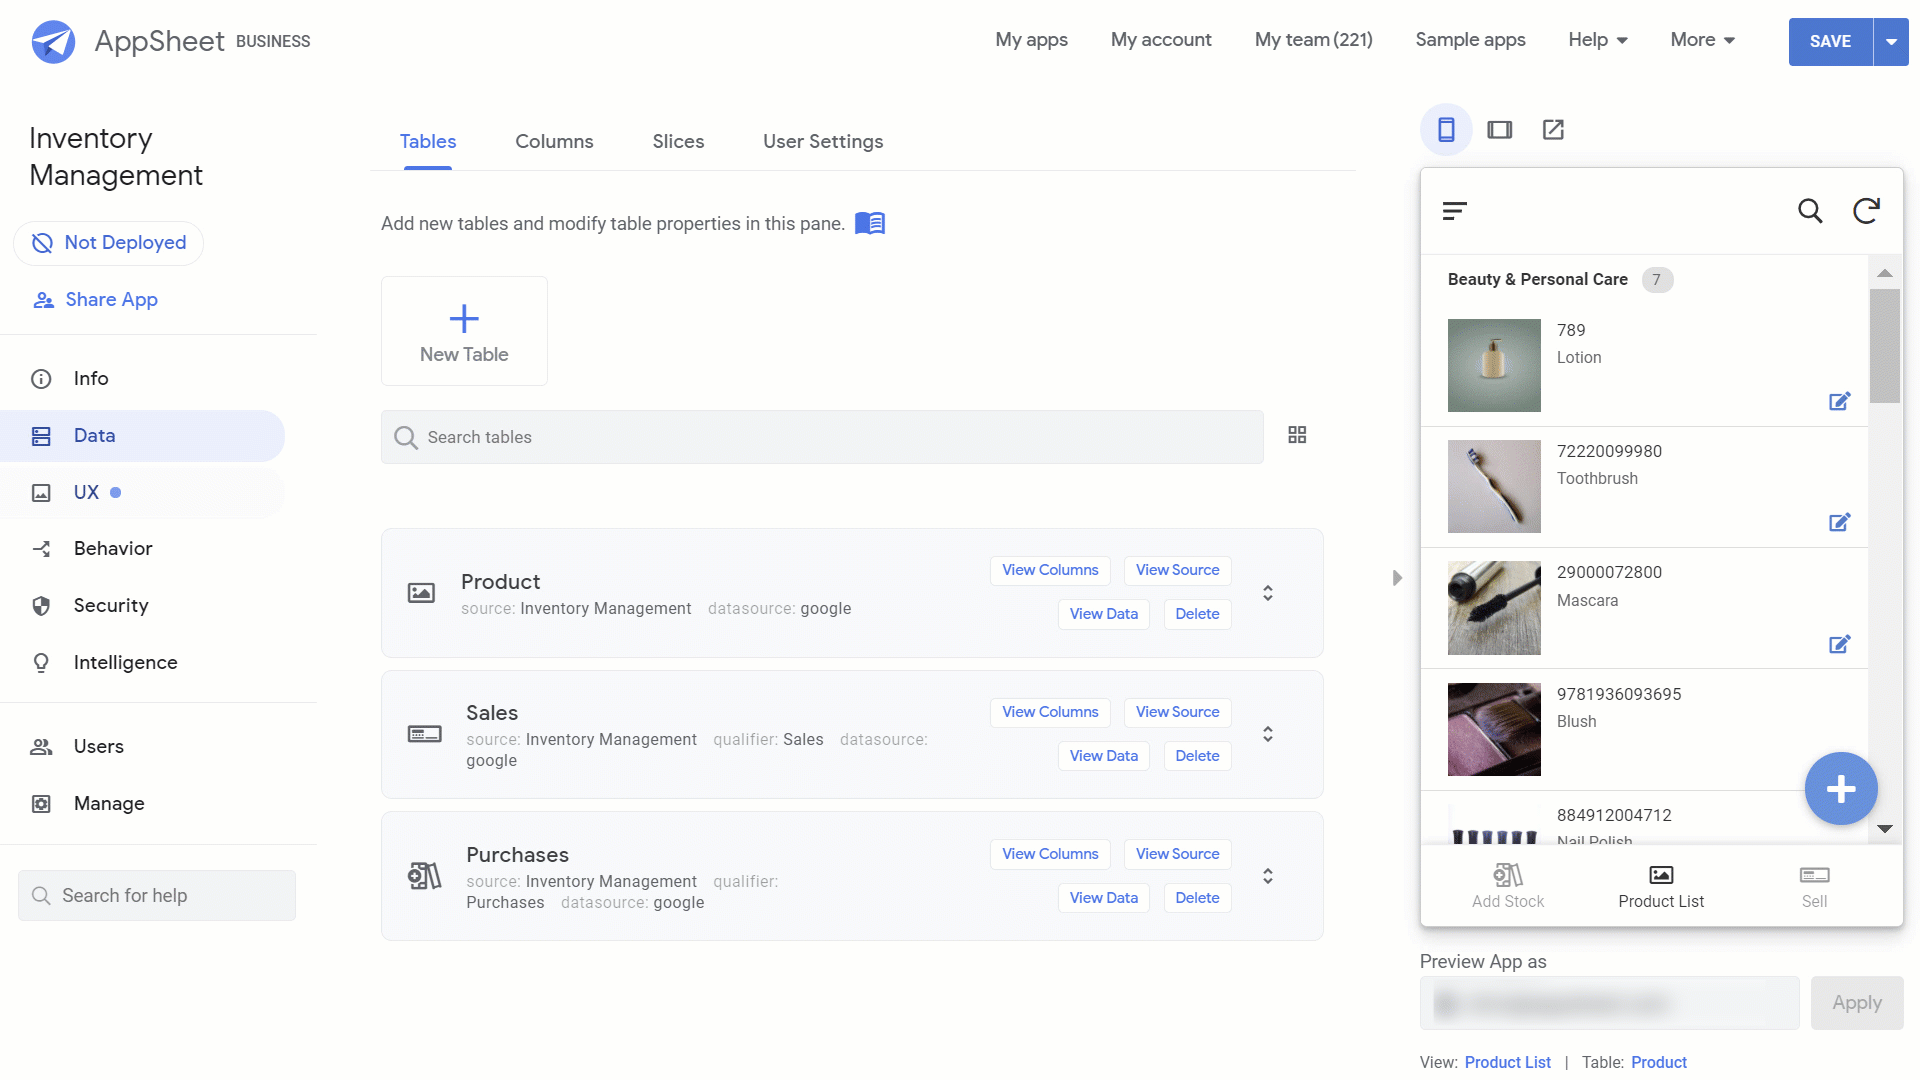 And that’s it. If you go to UX>View>Product List view, you can select either the Deck view or Table view, then select Current Stock as one of your headers. You will see every product’s Current Stock level.